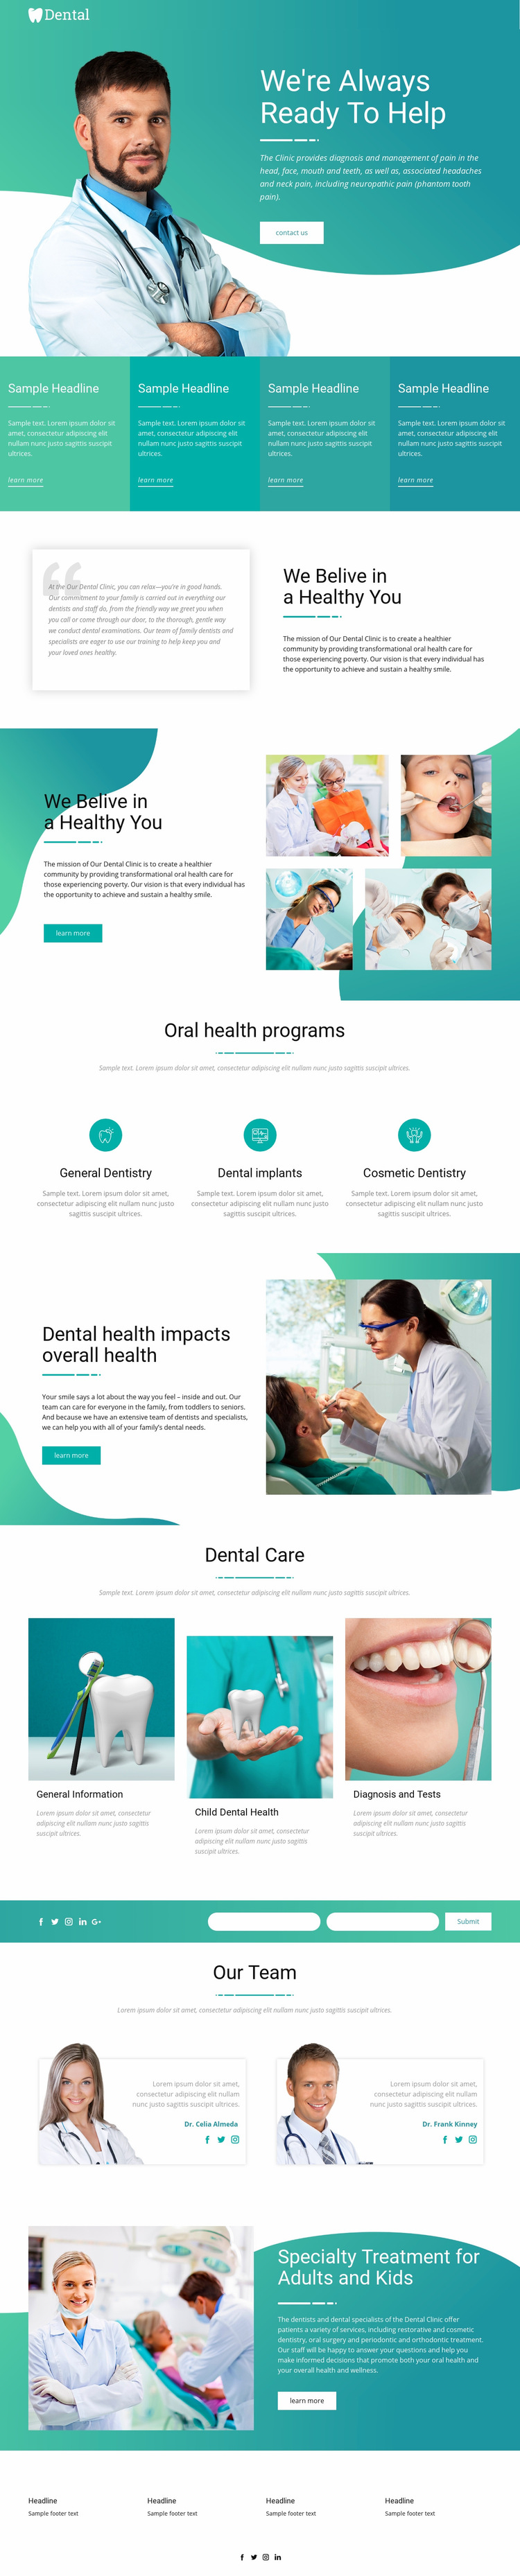 Serving and helping medicine Web Page Design